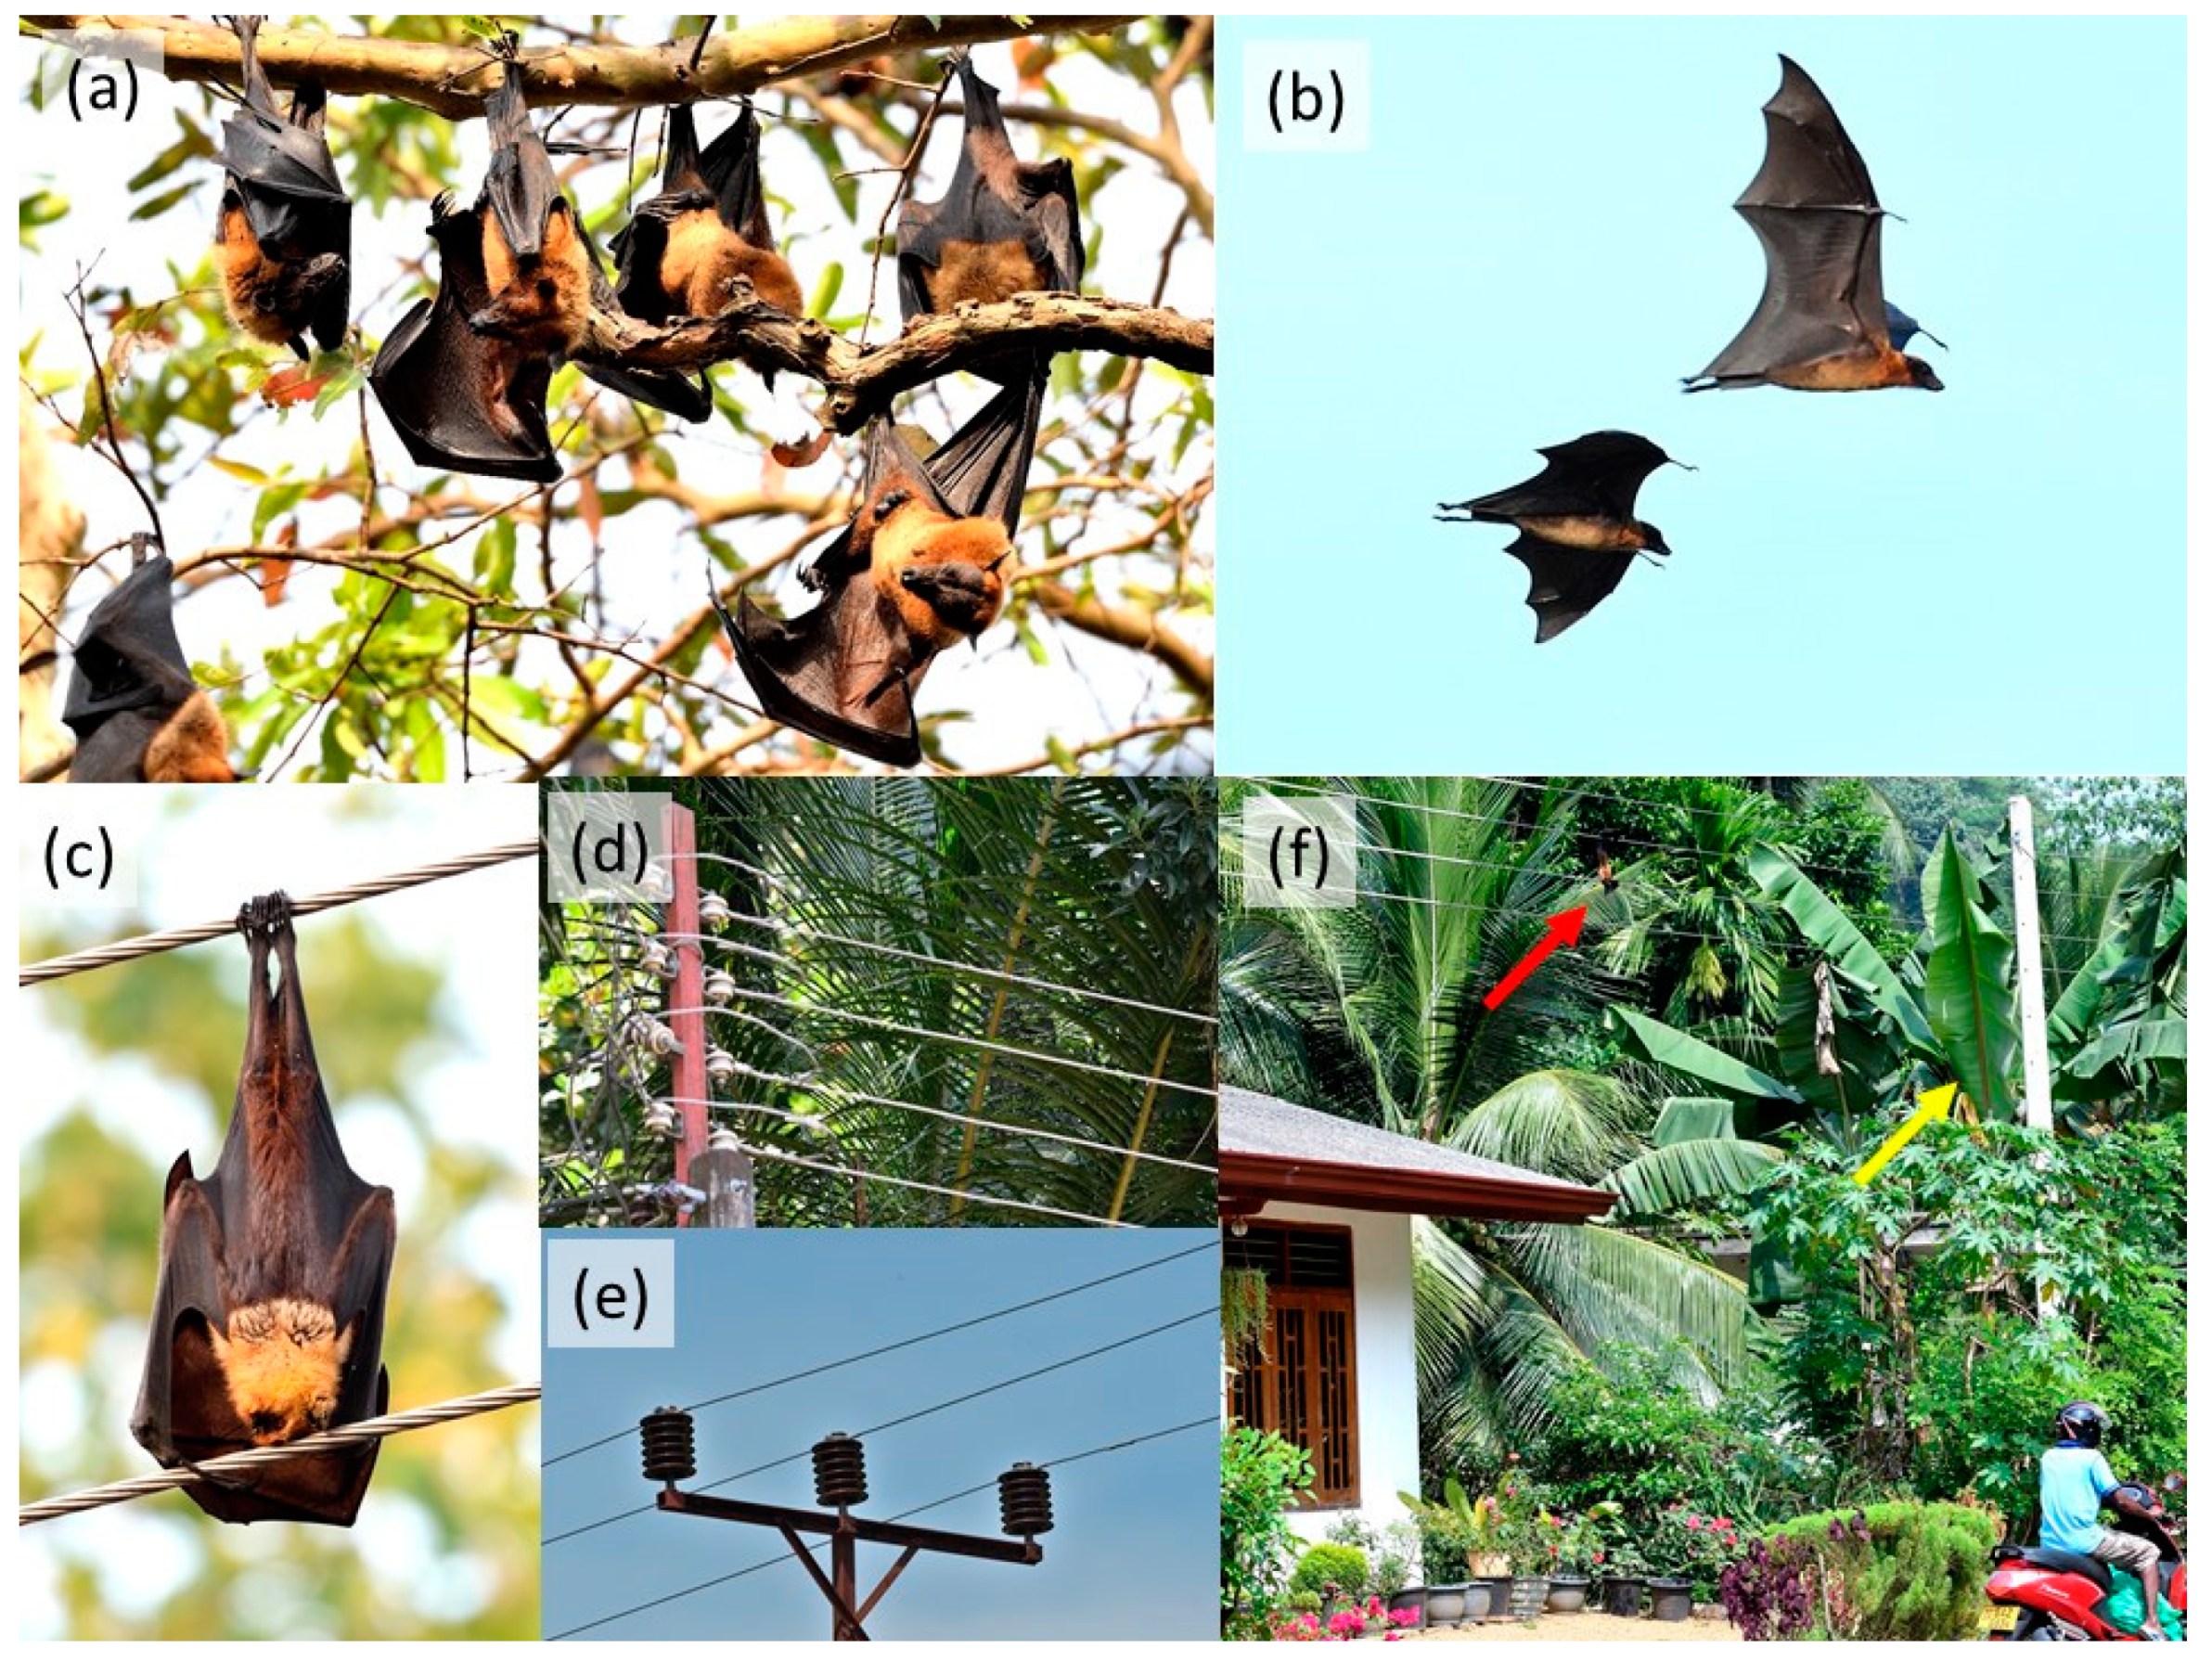 Diversity | Free Full-Text | Urban Sprawl, Food Subsidies and Power Lines:  An Ecological Trap for Large Frugivorous Bats in Sri Lanka?